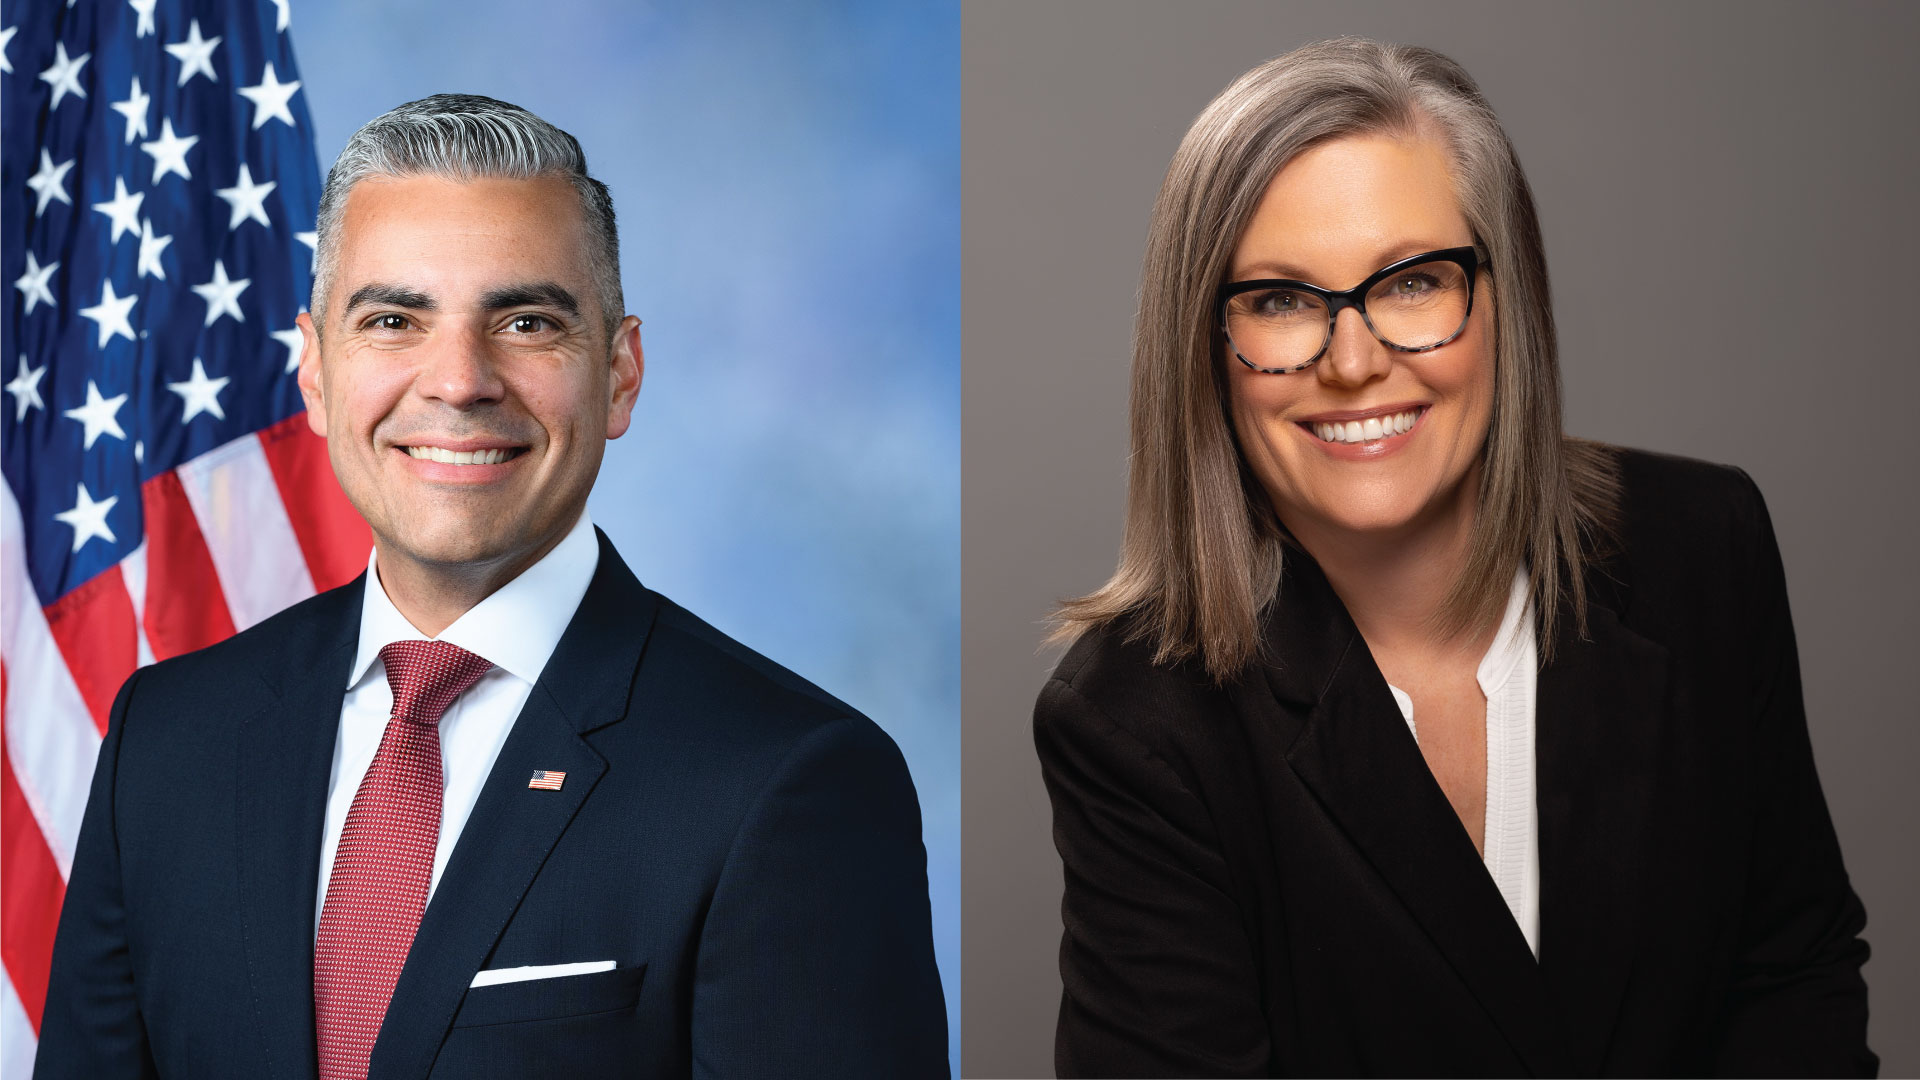 Two of Arizona's new elected officials, Republican Congress Member Juan Ciscomani (left) and Governor Katie Hobbs (right).